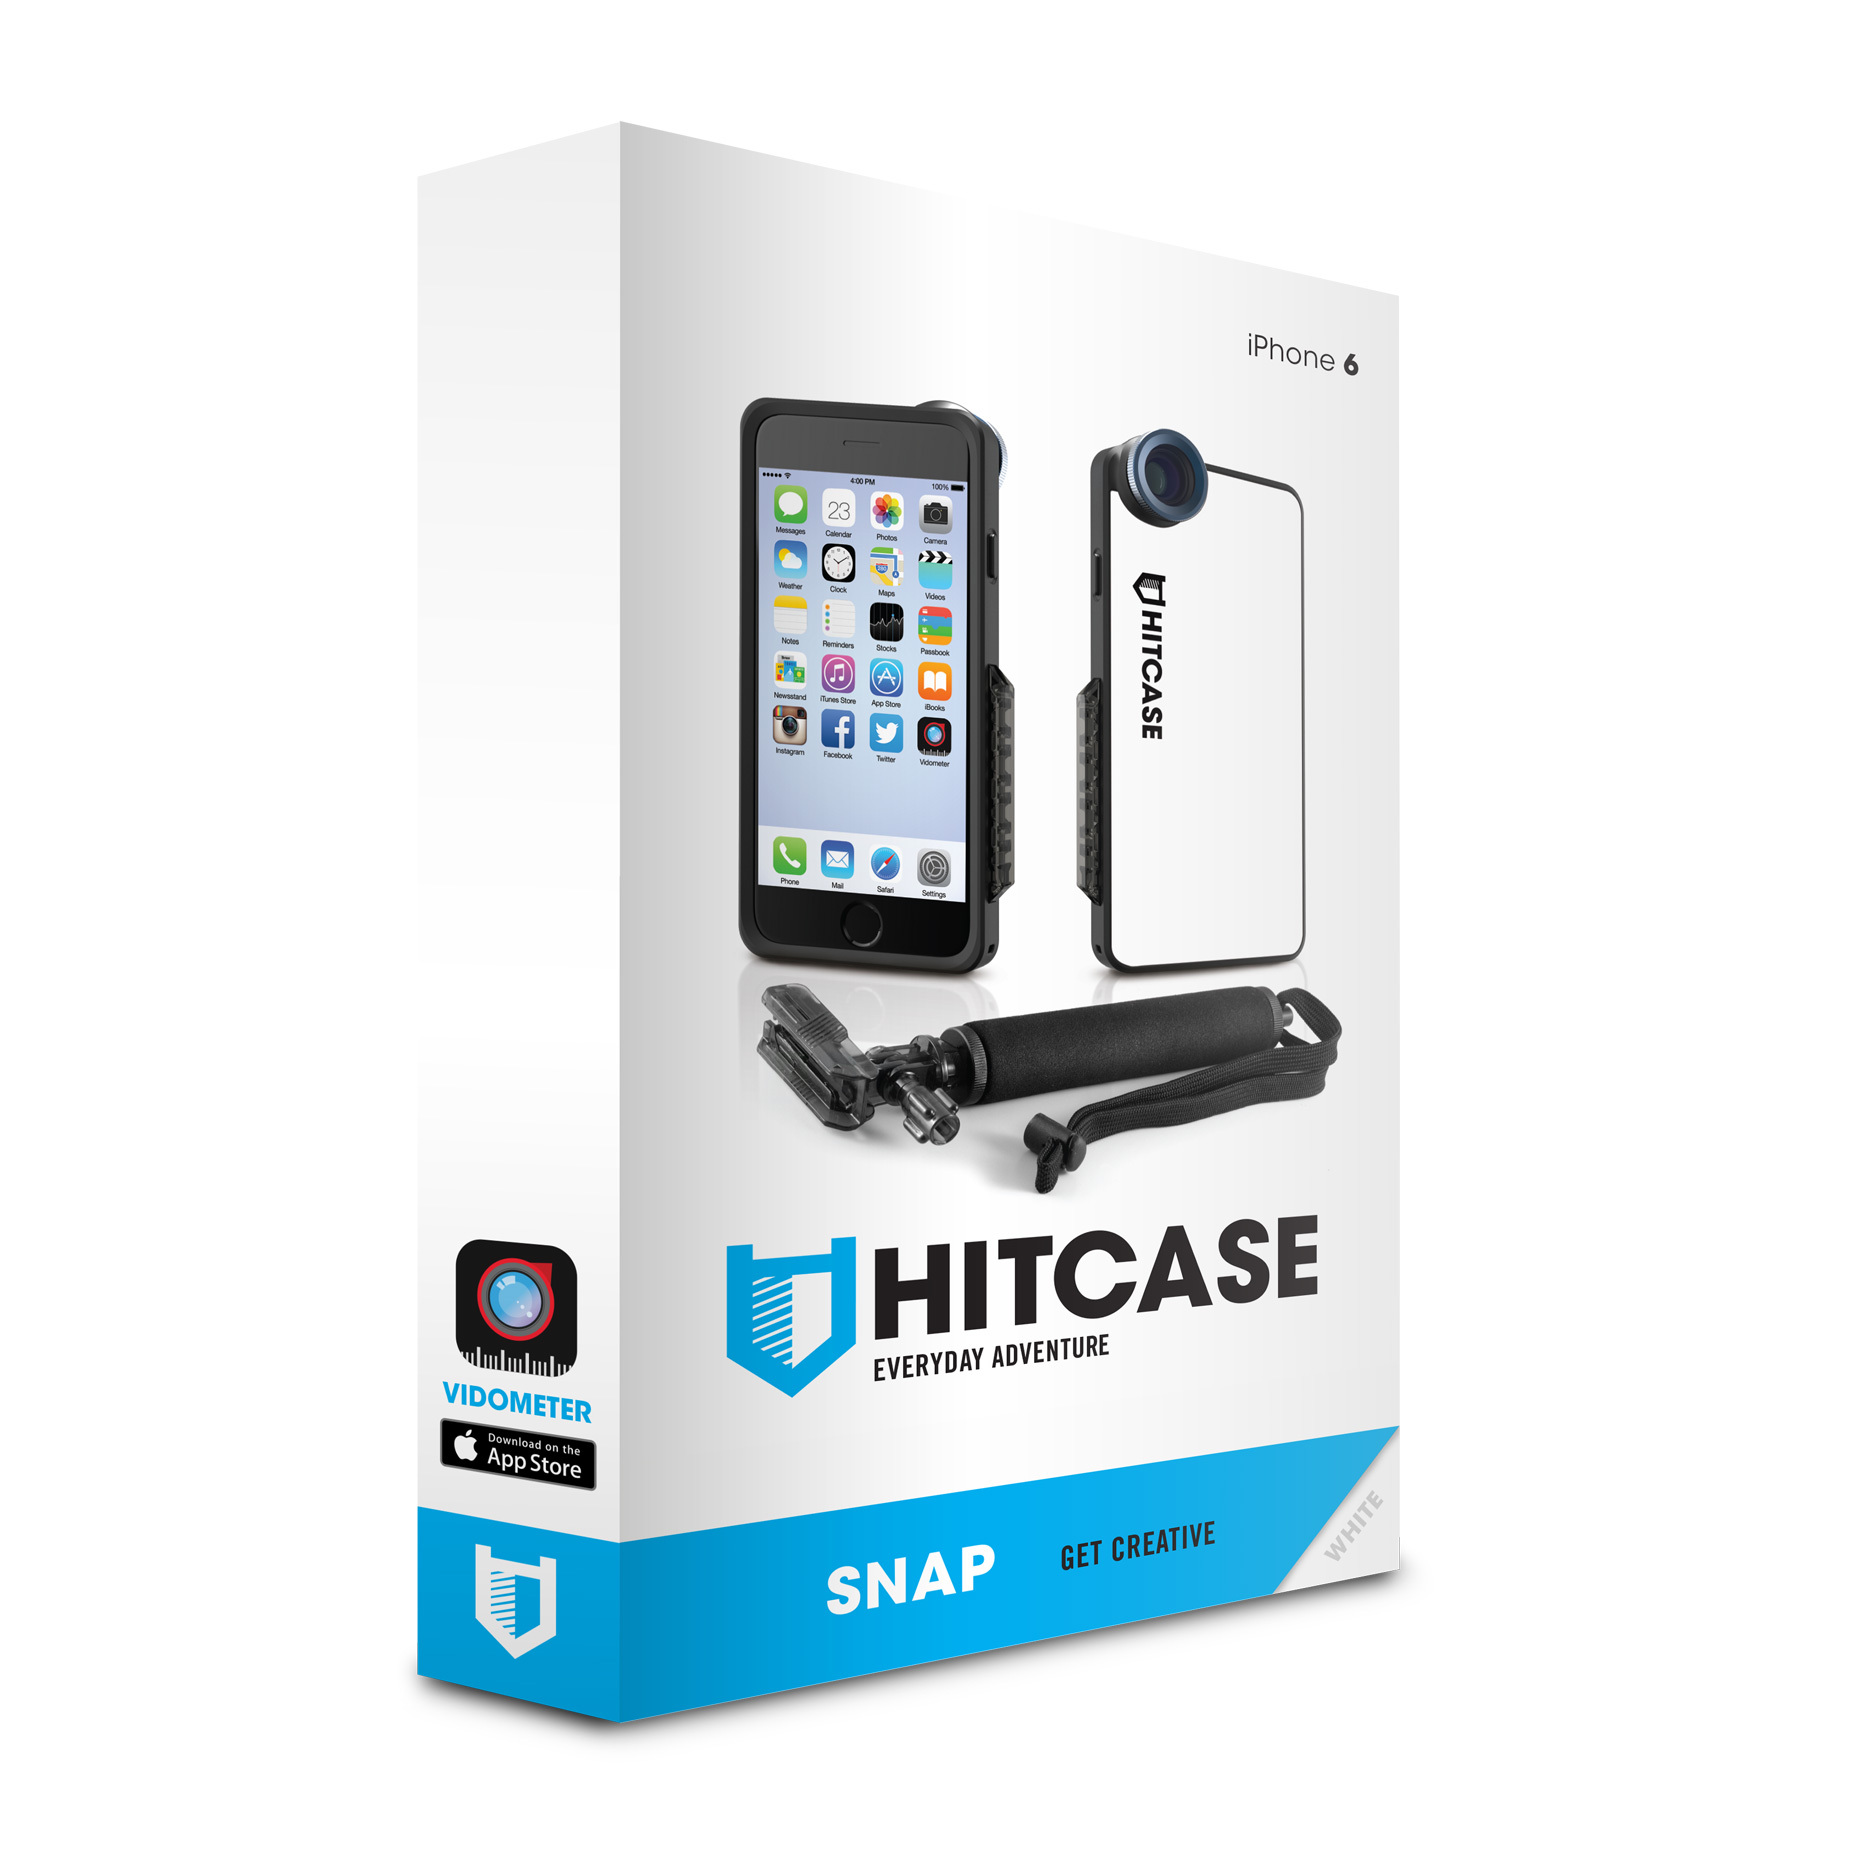 HITCASE SNAP FOR iPHONE 6 SAFELY VIDEO YOUR EXTREME SPORTS 6S WHITE 